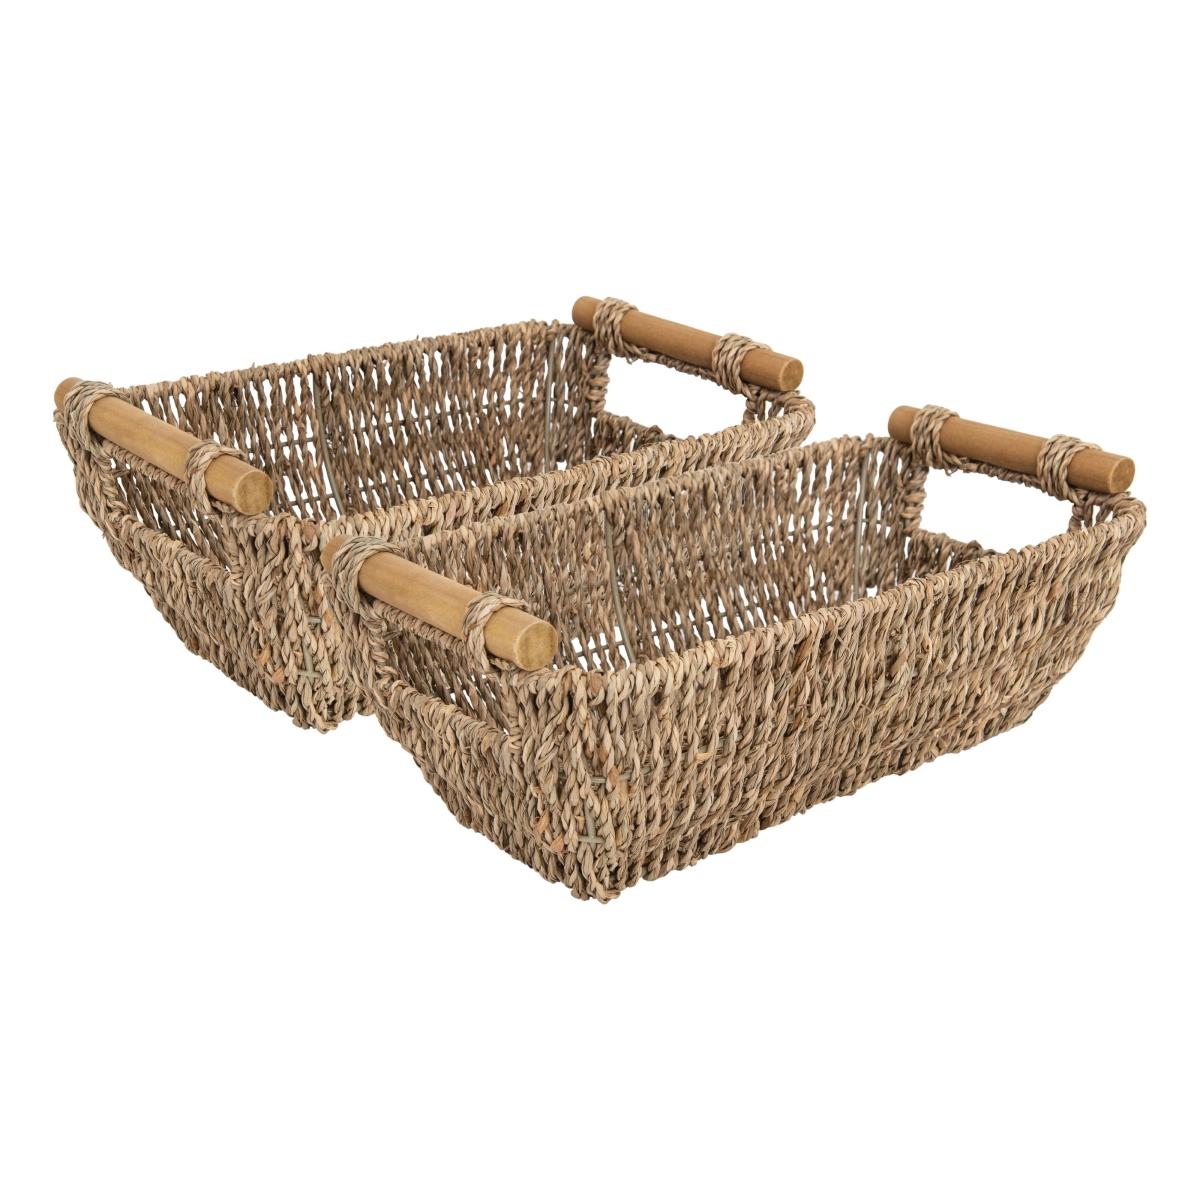 Picture of we think storage WTS-HC210 2pk 6.5L Hand-Woven Seagrass Basket